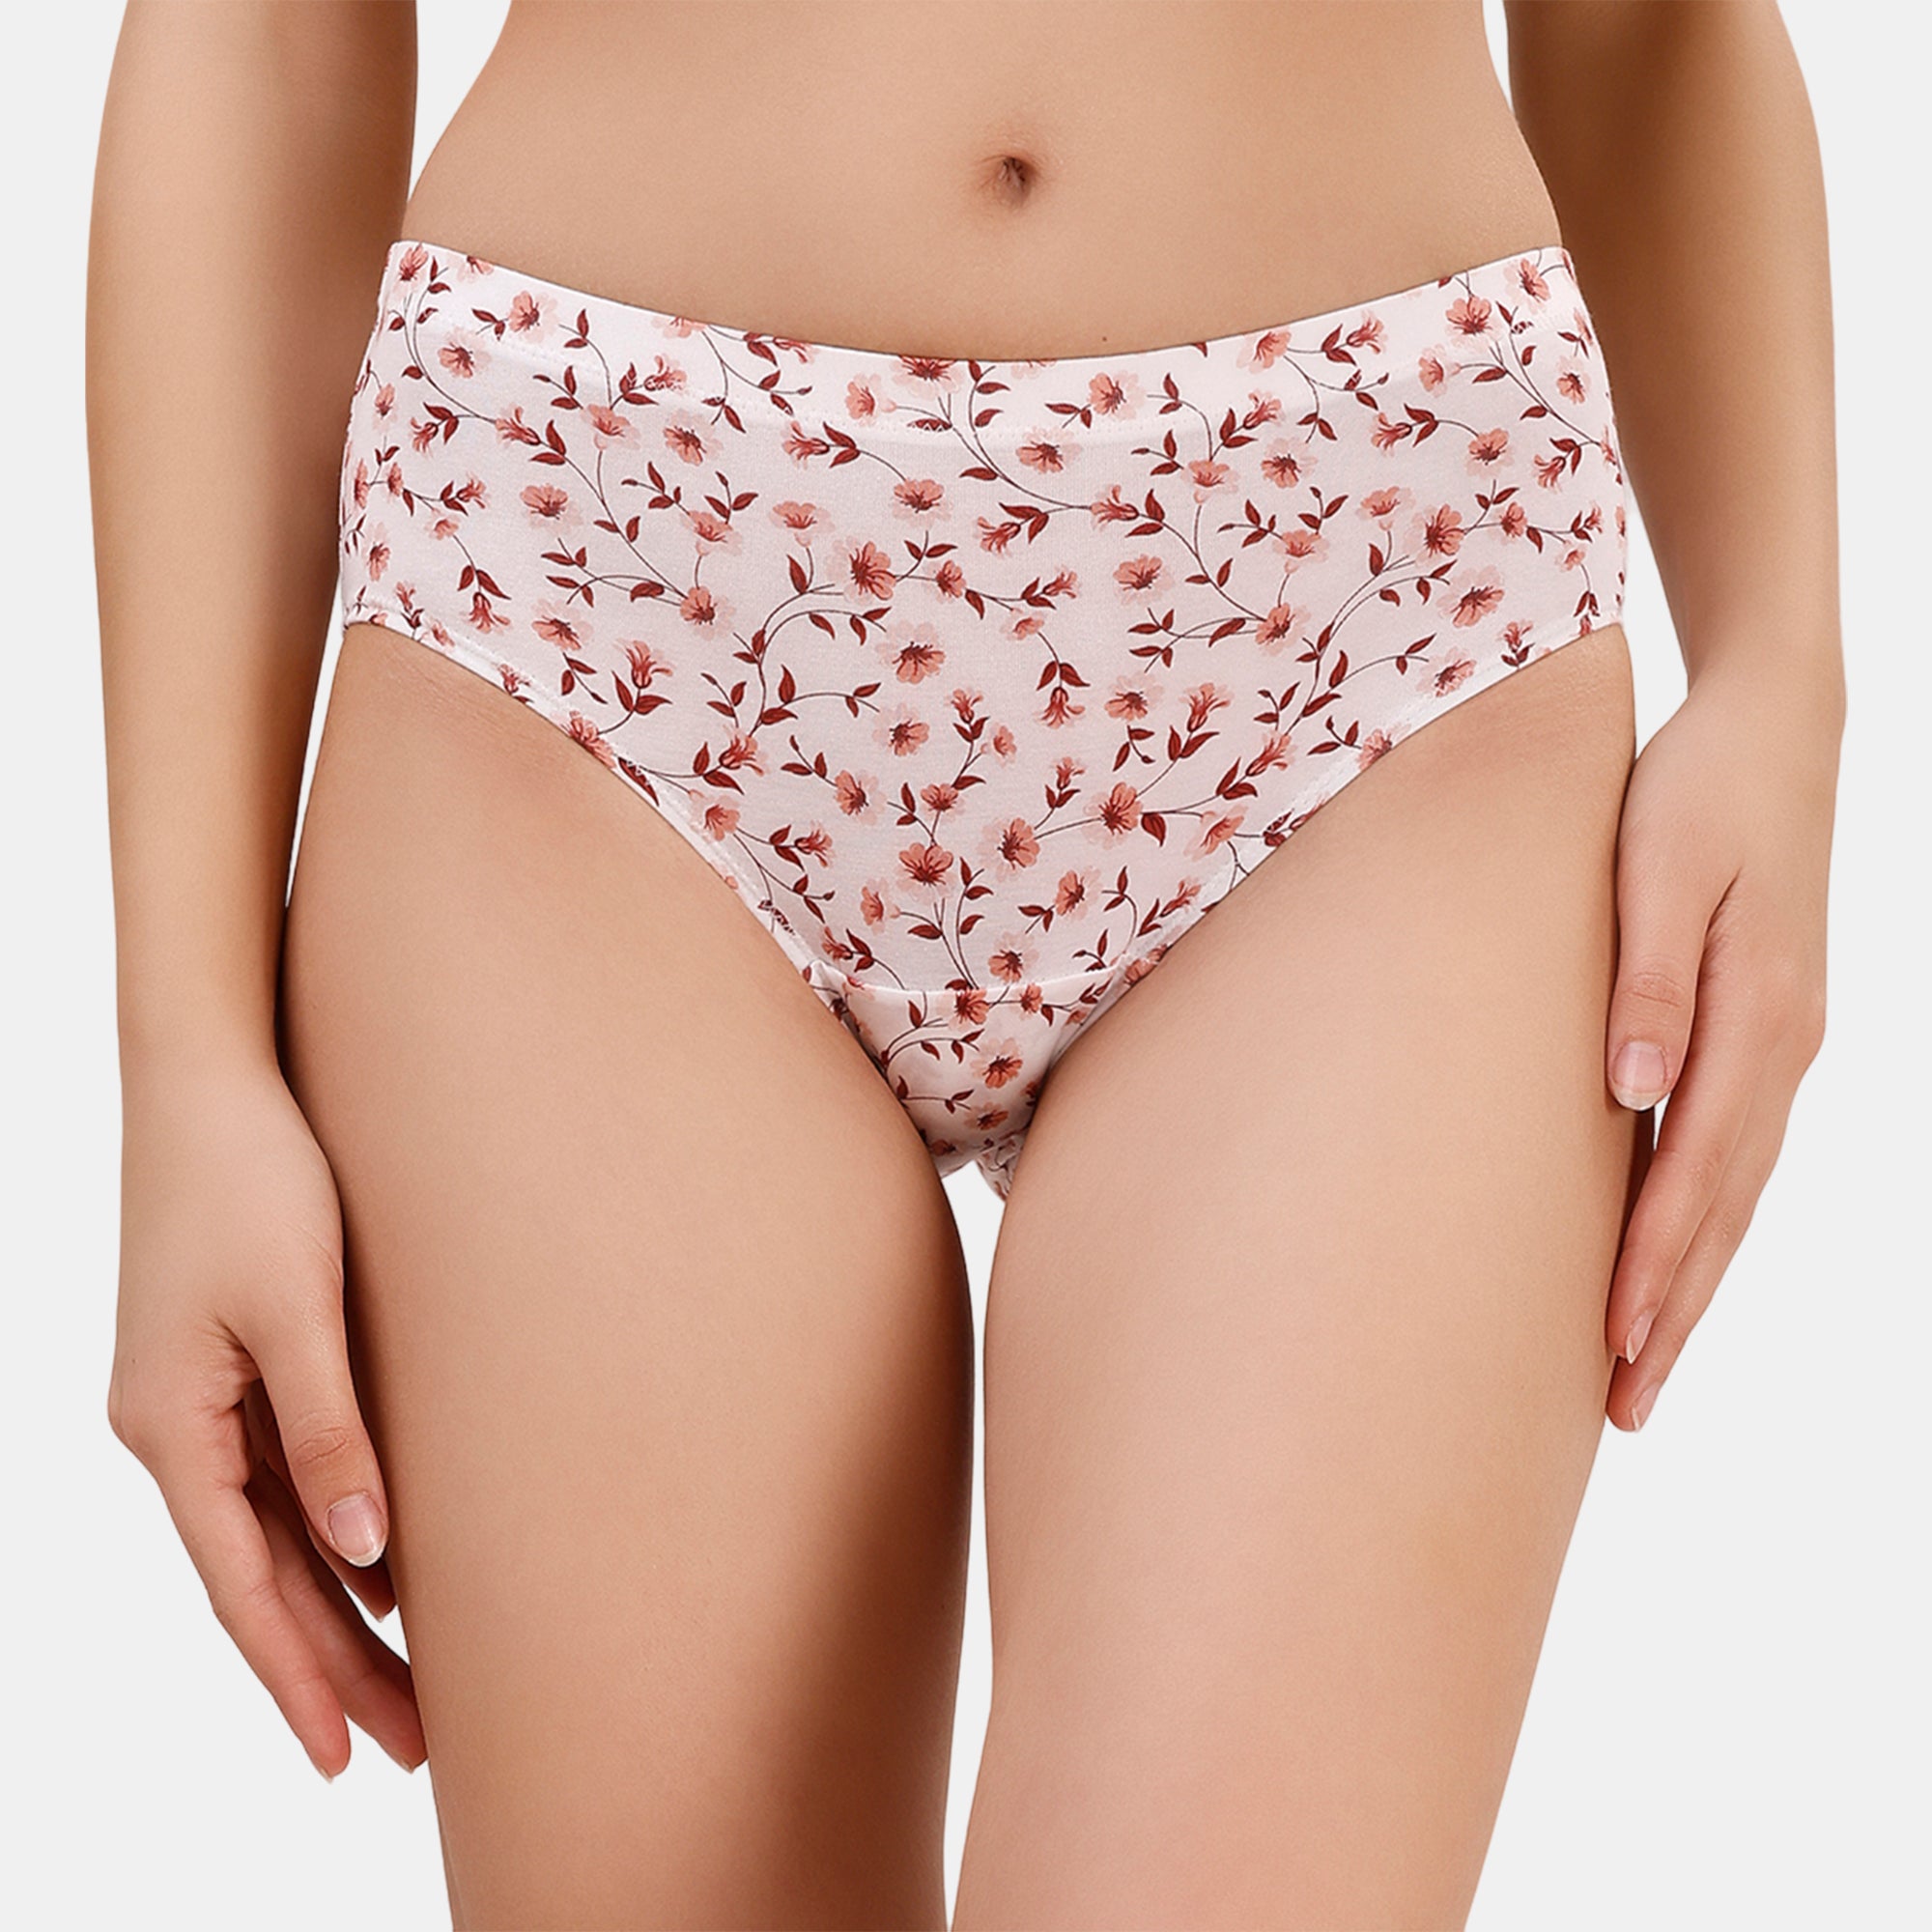 High Rise Full Coverage Printed Stretch Cotton Hipster Panty (Pack of 3) - 3FCB-30